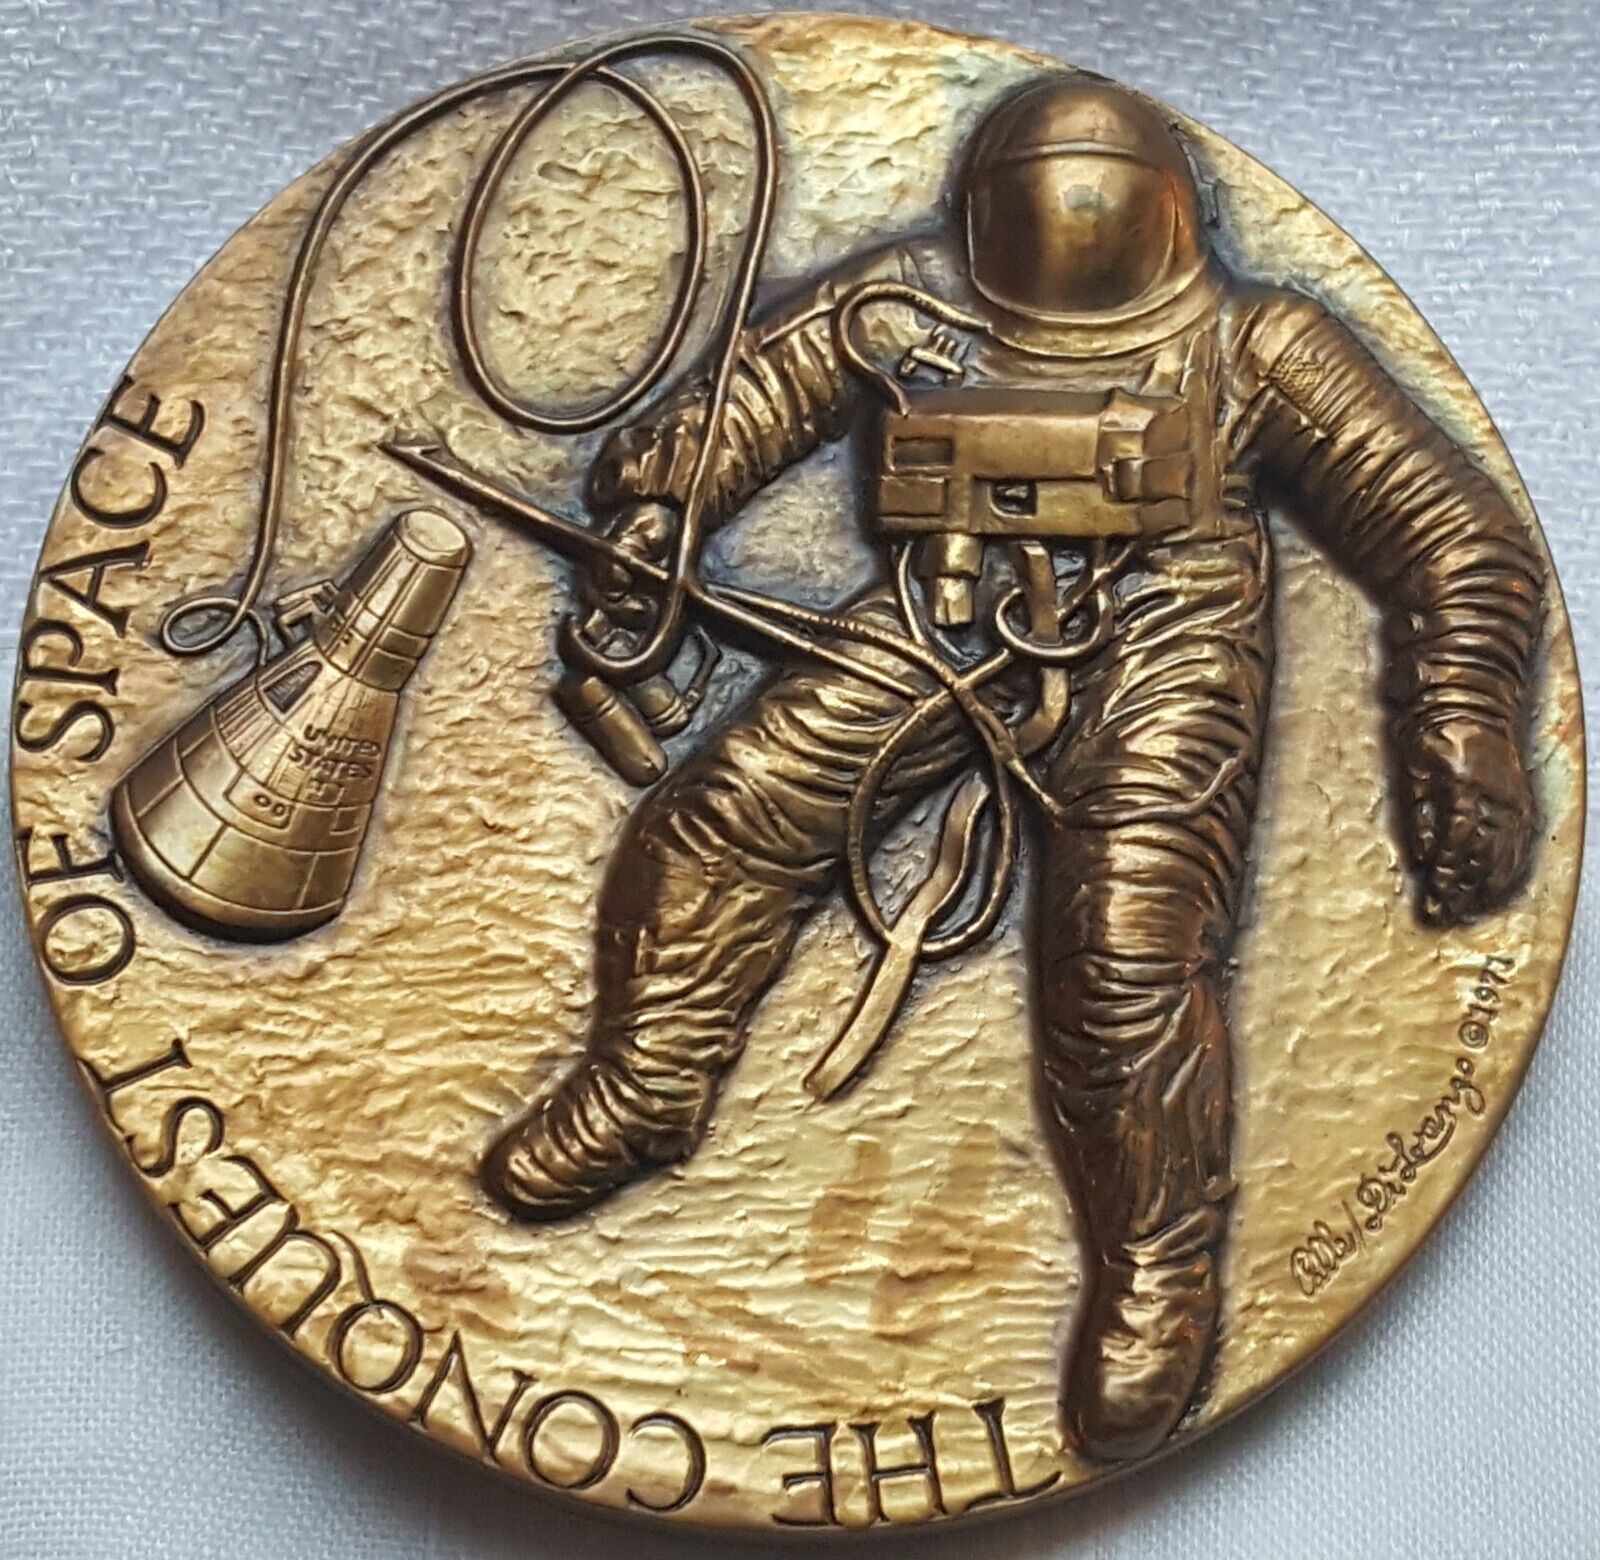 Man’s Dream “The Conquest Of Space” MACO Bronze Medal in Very High Relief - 64mm